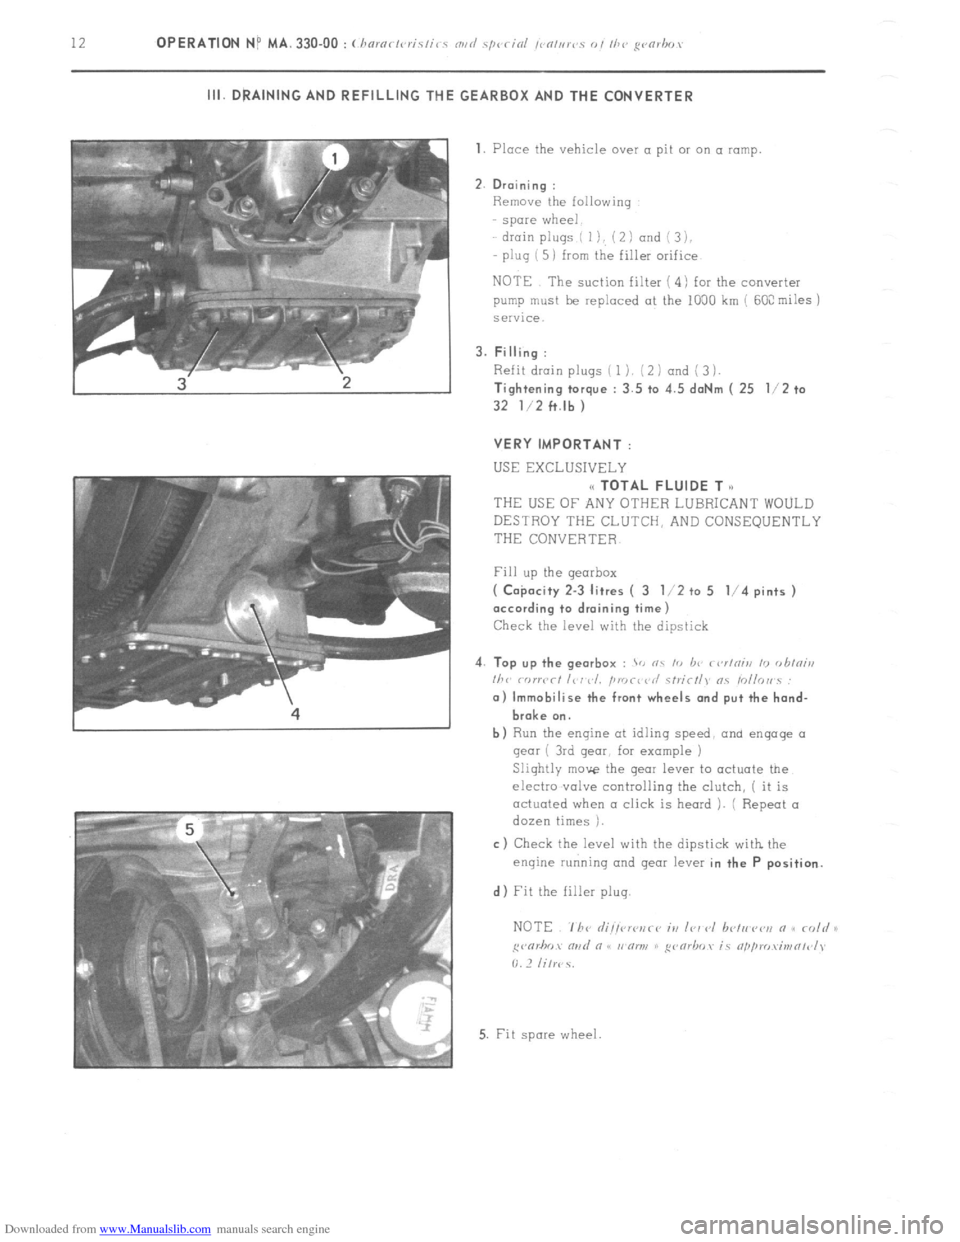 Citroen CX 1981 1.G Workshop Manual Downloaded from www.Manualslib.com manuals search engine 12 OPERATION NP MA. 330.00 : (haro</vr-is/i< c m,</ s/wcinl ,cn,i,rt~. o, I/>? gvmhr,, III. DRAINING AND REFILLING THE GEARBOX AND THE CONVERTE